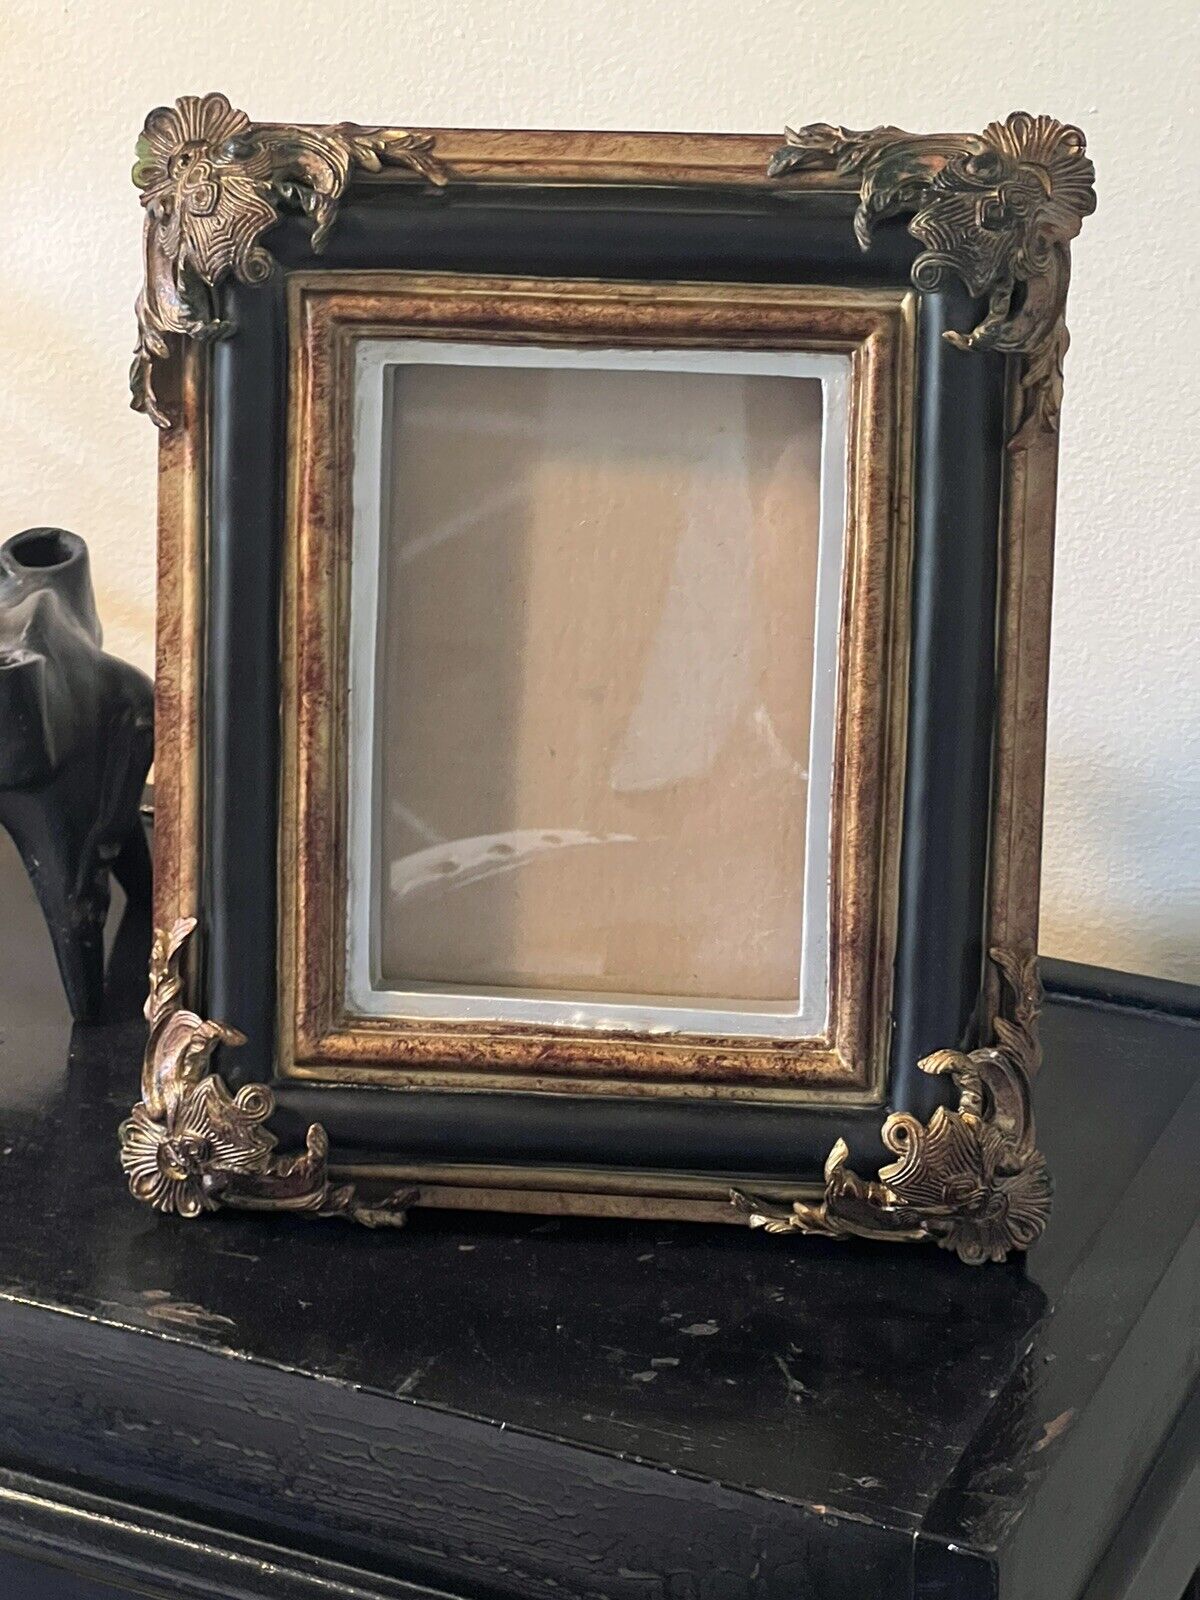 12” X 9.5” x 2” Picture Frame Wood Ornate Vintage Black, Gold, Silver Heavy